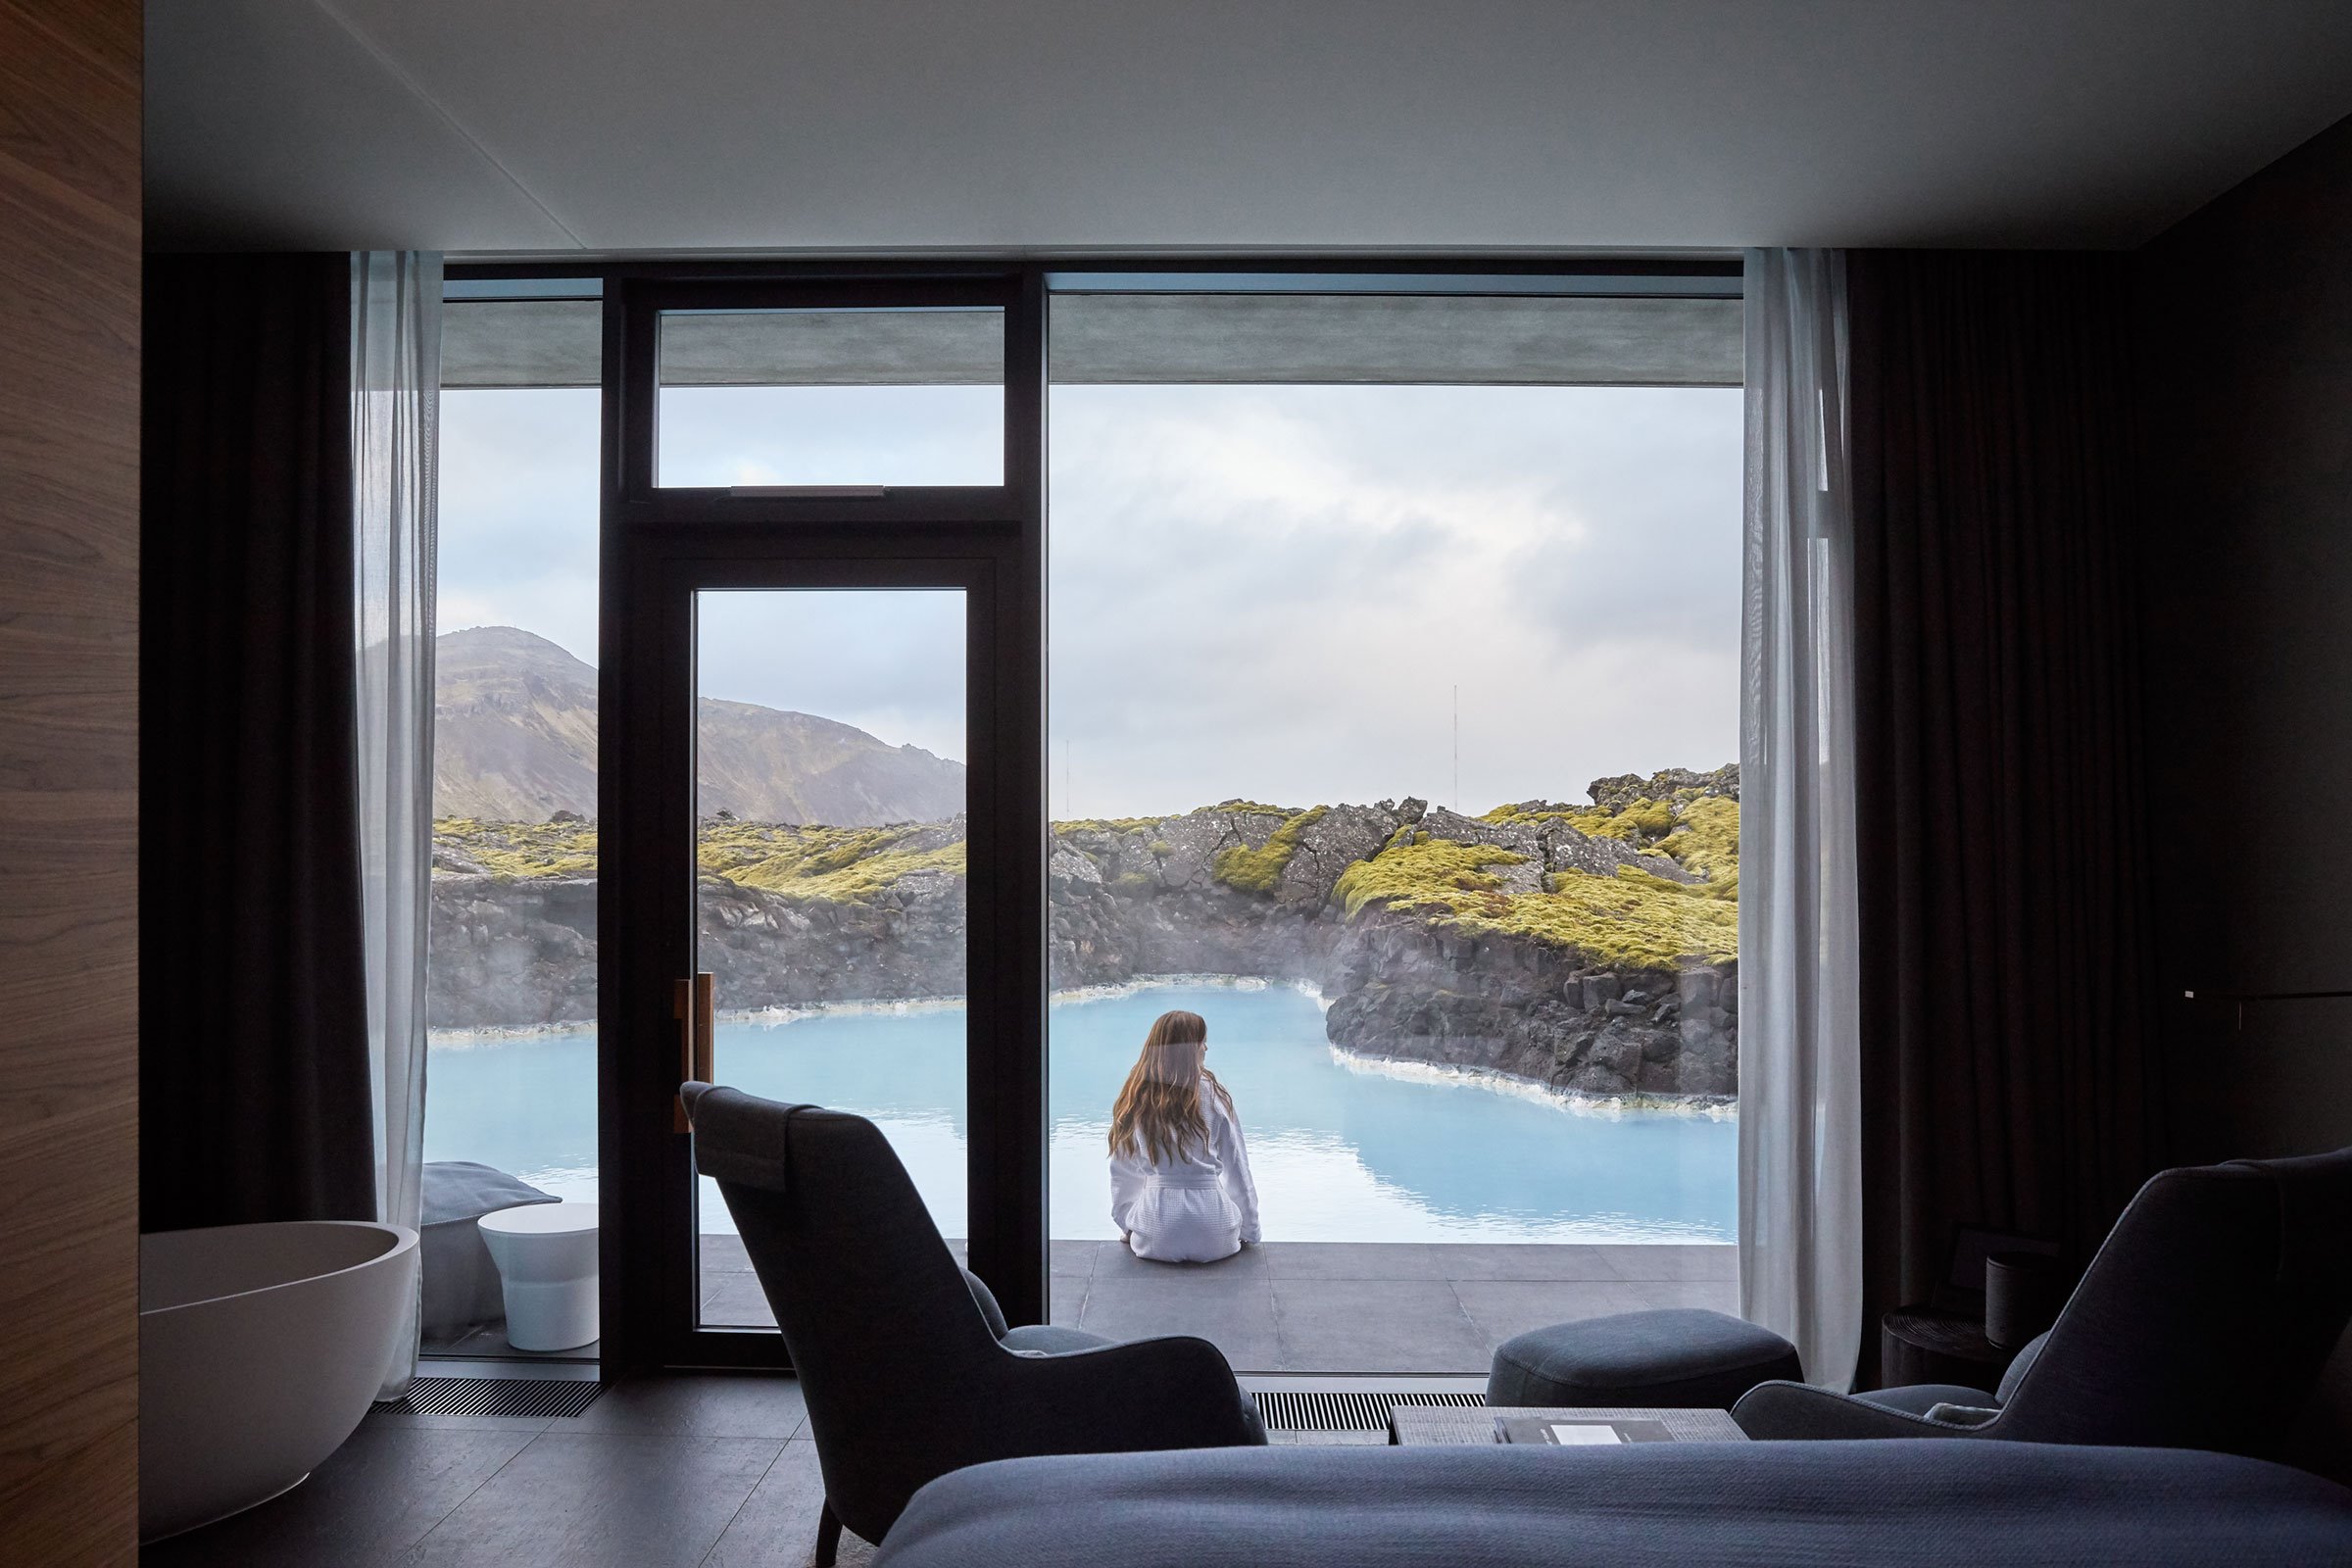 Staying at the Blue Lagoon Retreat Hotel is one of the most luxurious experiences Iceland has to offer.